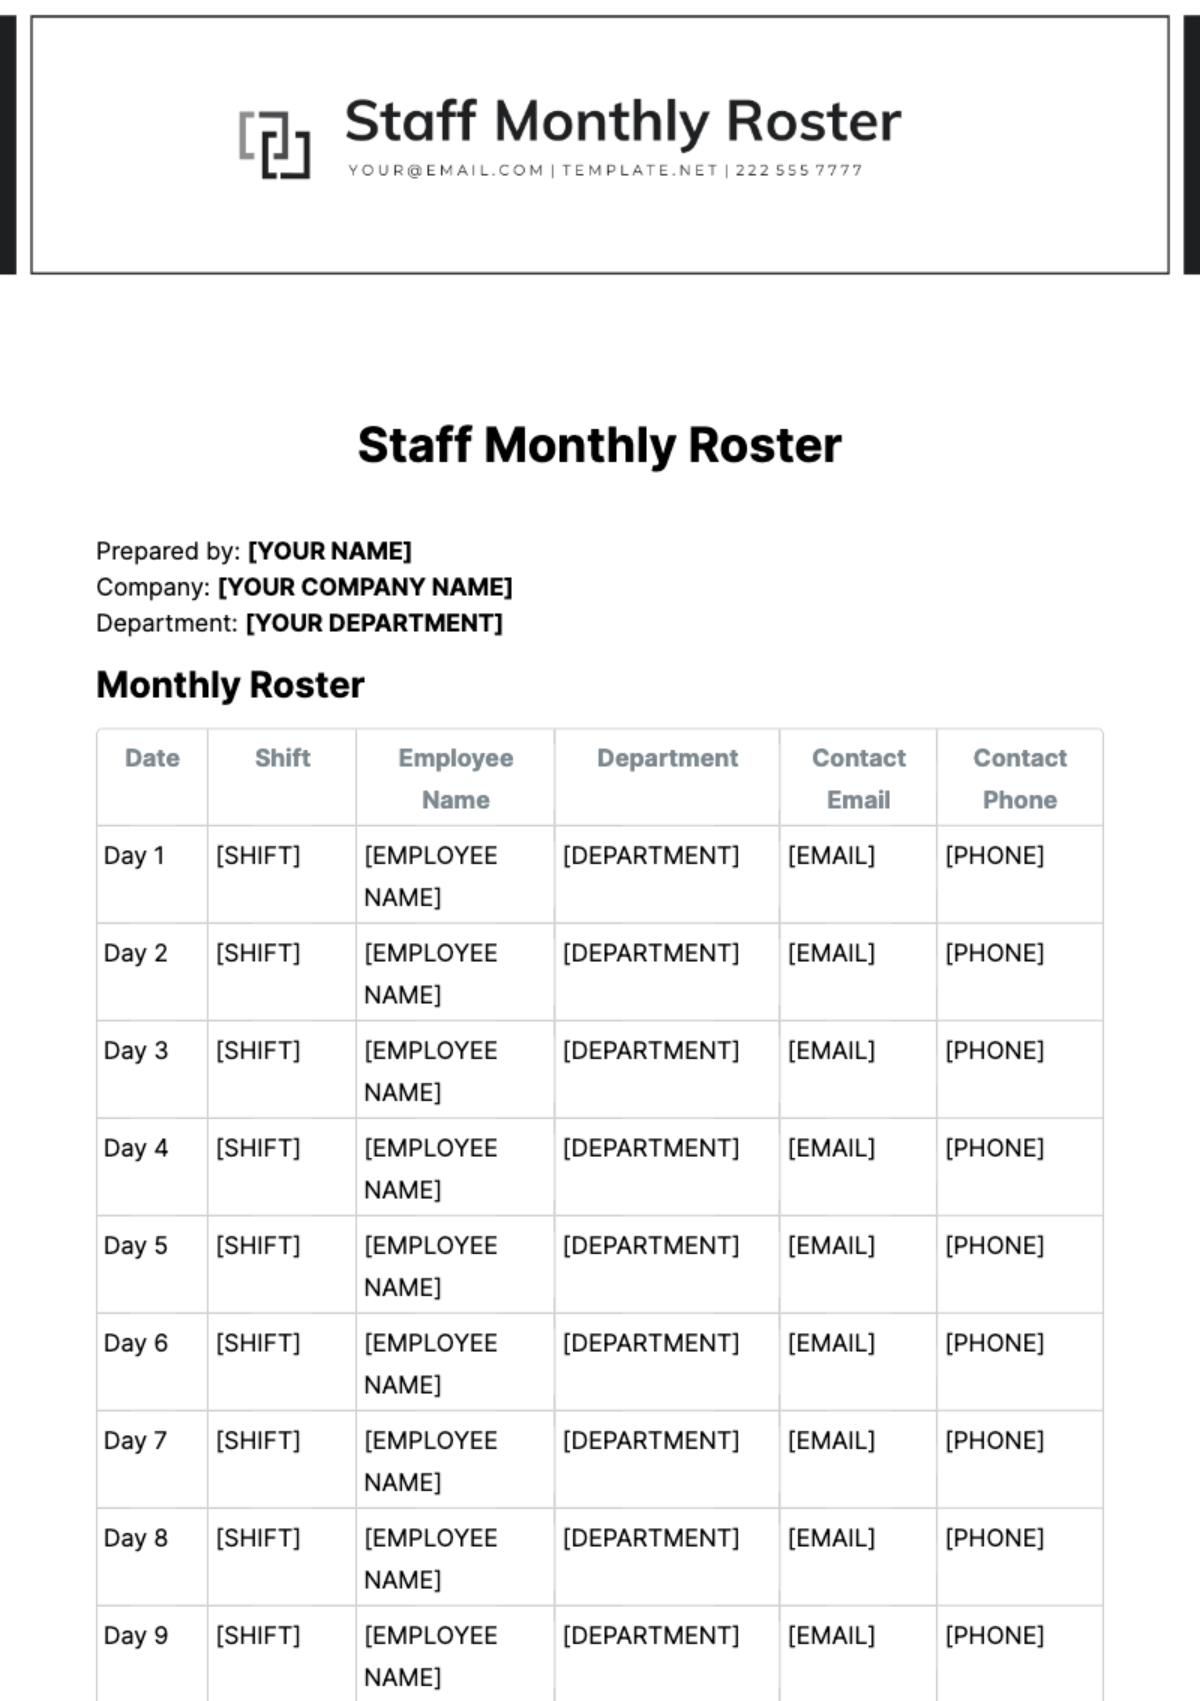 Staff Monthly Roster Template